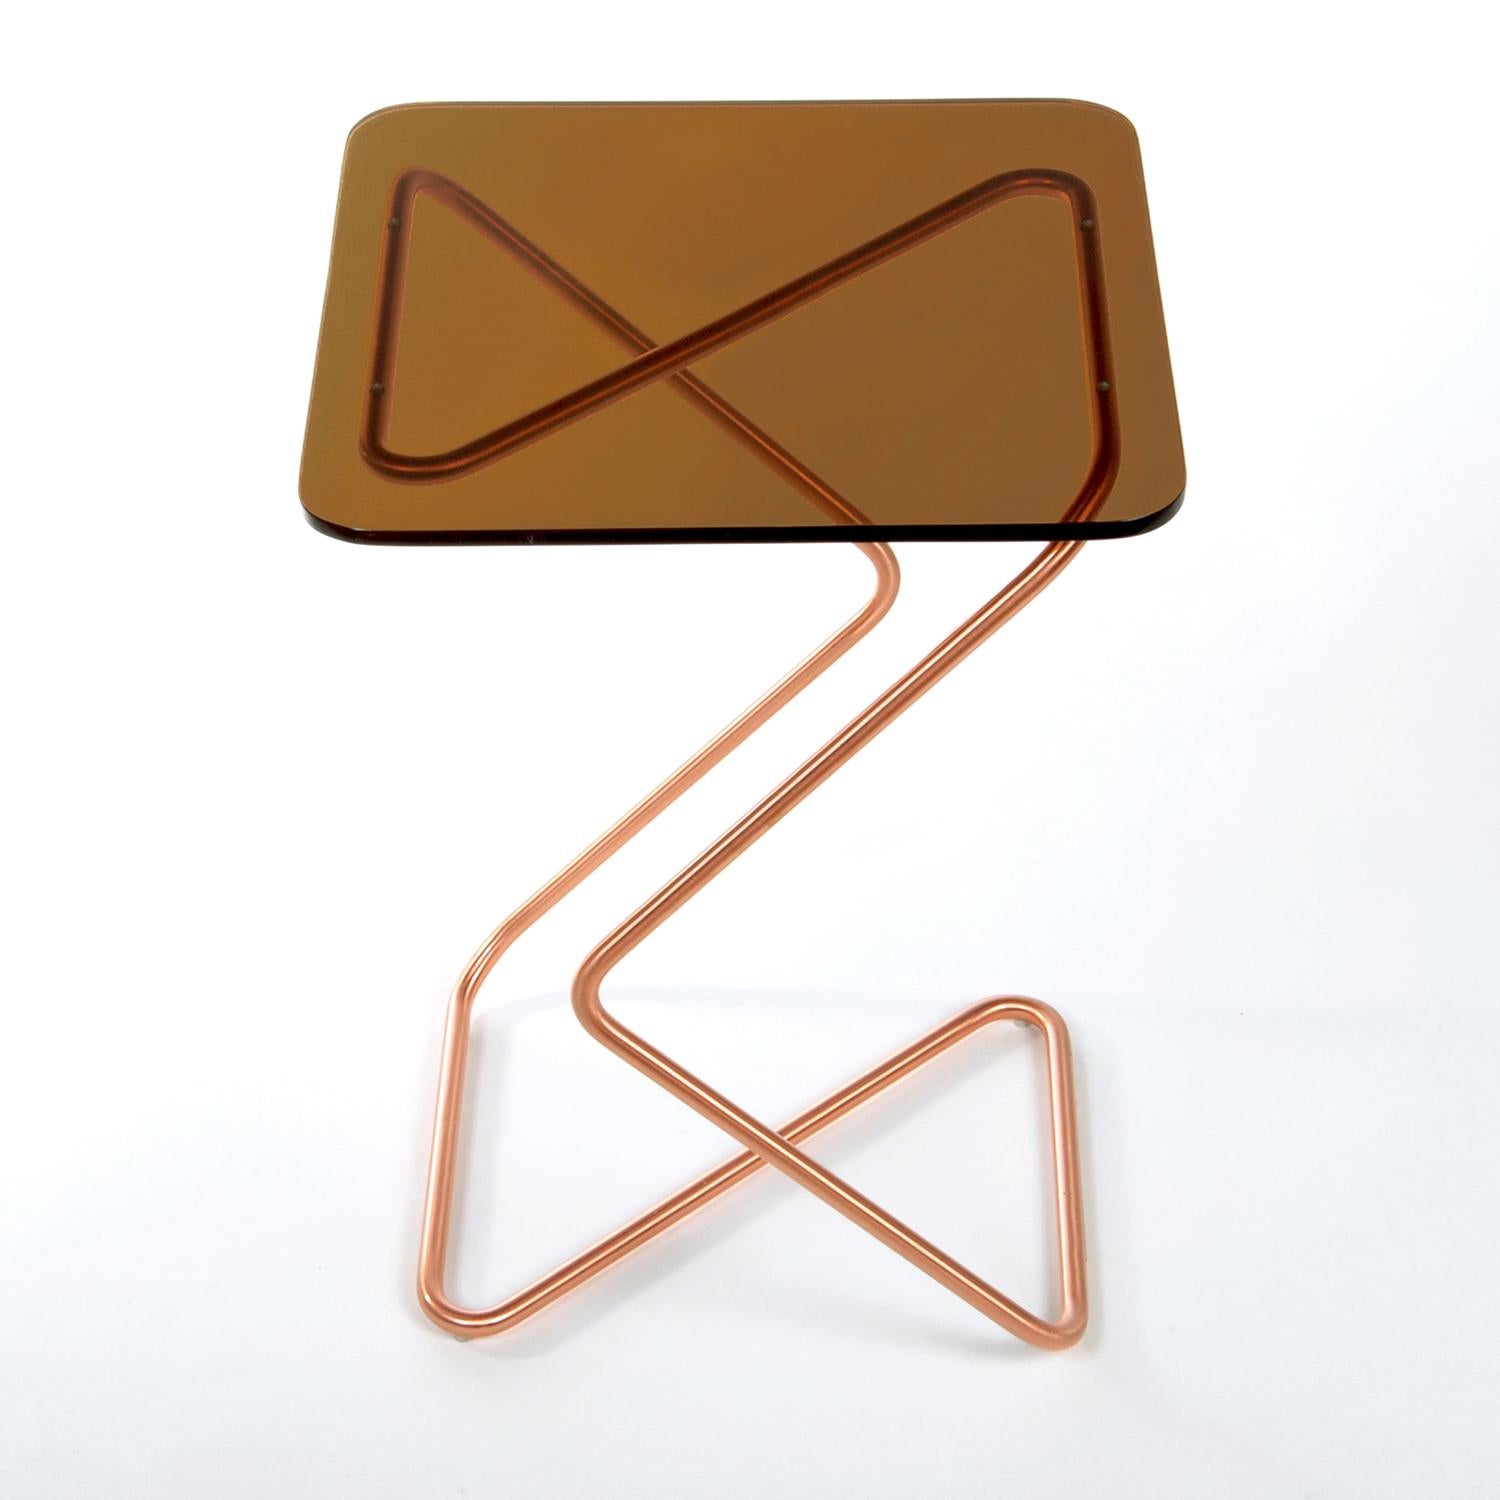 The square side table by Rita Kettaneh 
Dimensions: The base: brushed stainless steel plated with copper 
 optionally plated with copper or brass
 The top: acrylic
Materials: H 46 x W 33 x D 33 cm
Weight: 3.75 Kg

Colors and Finishes: